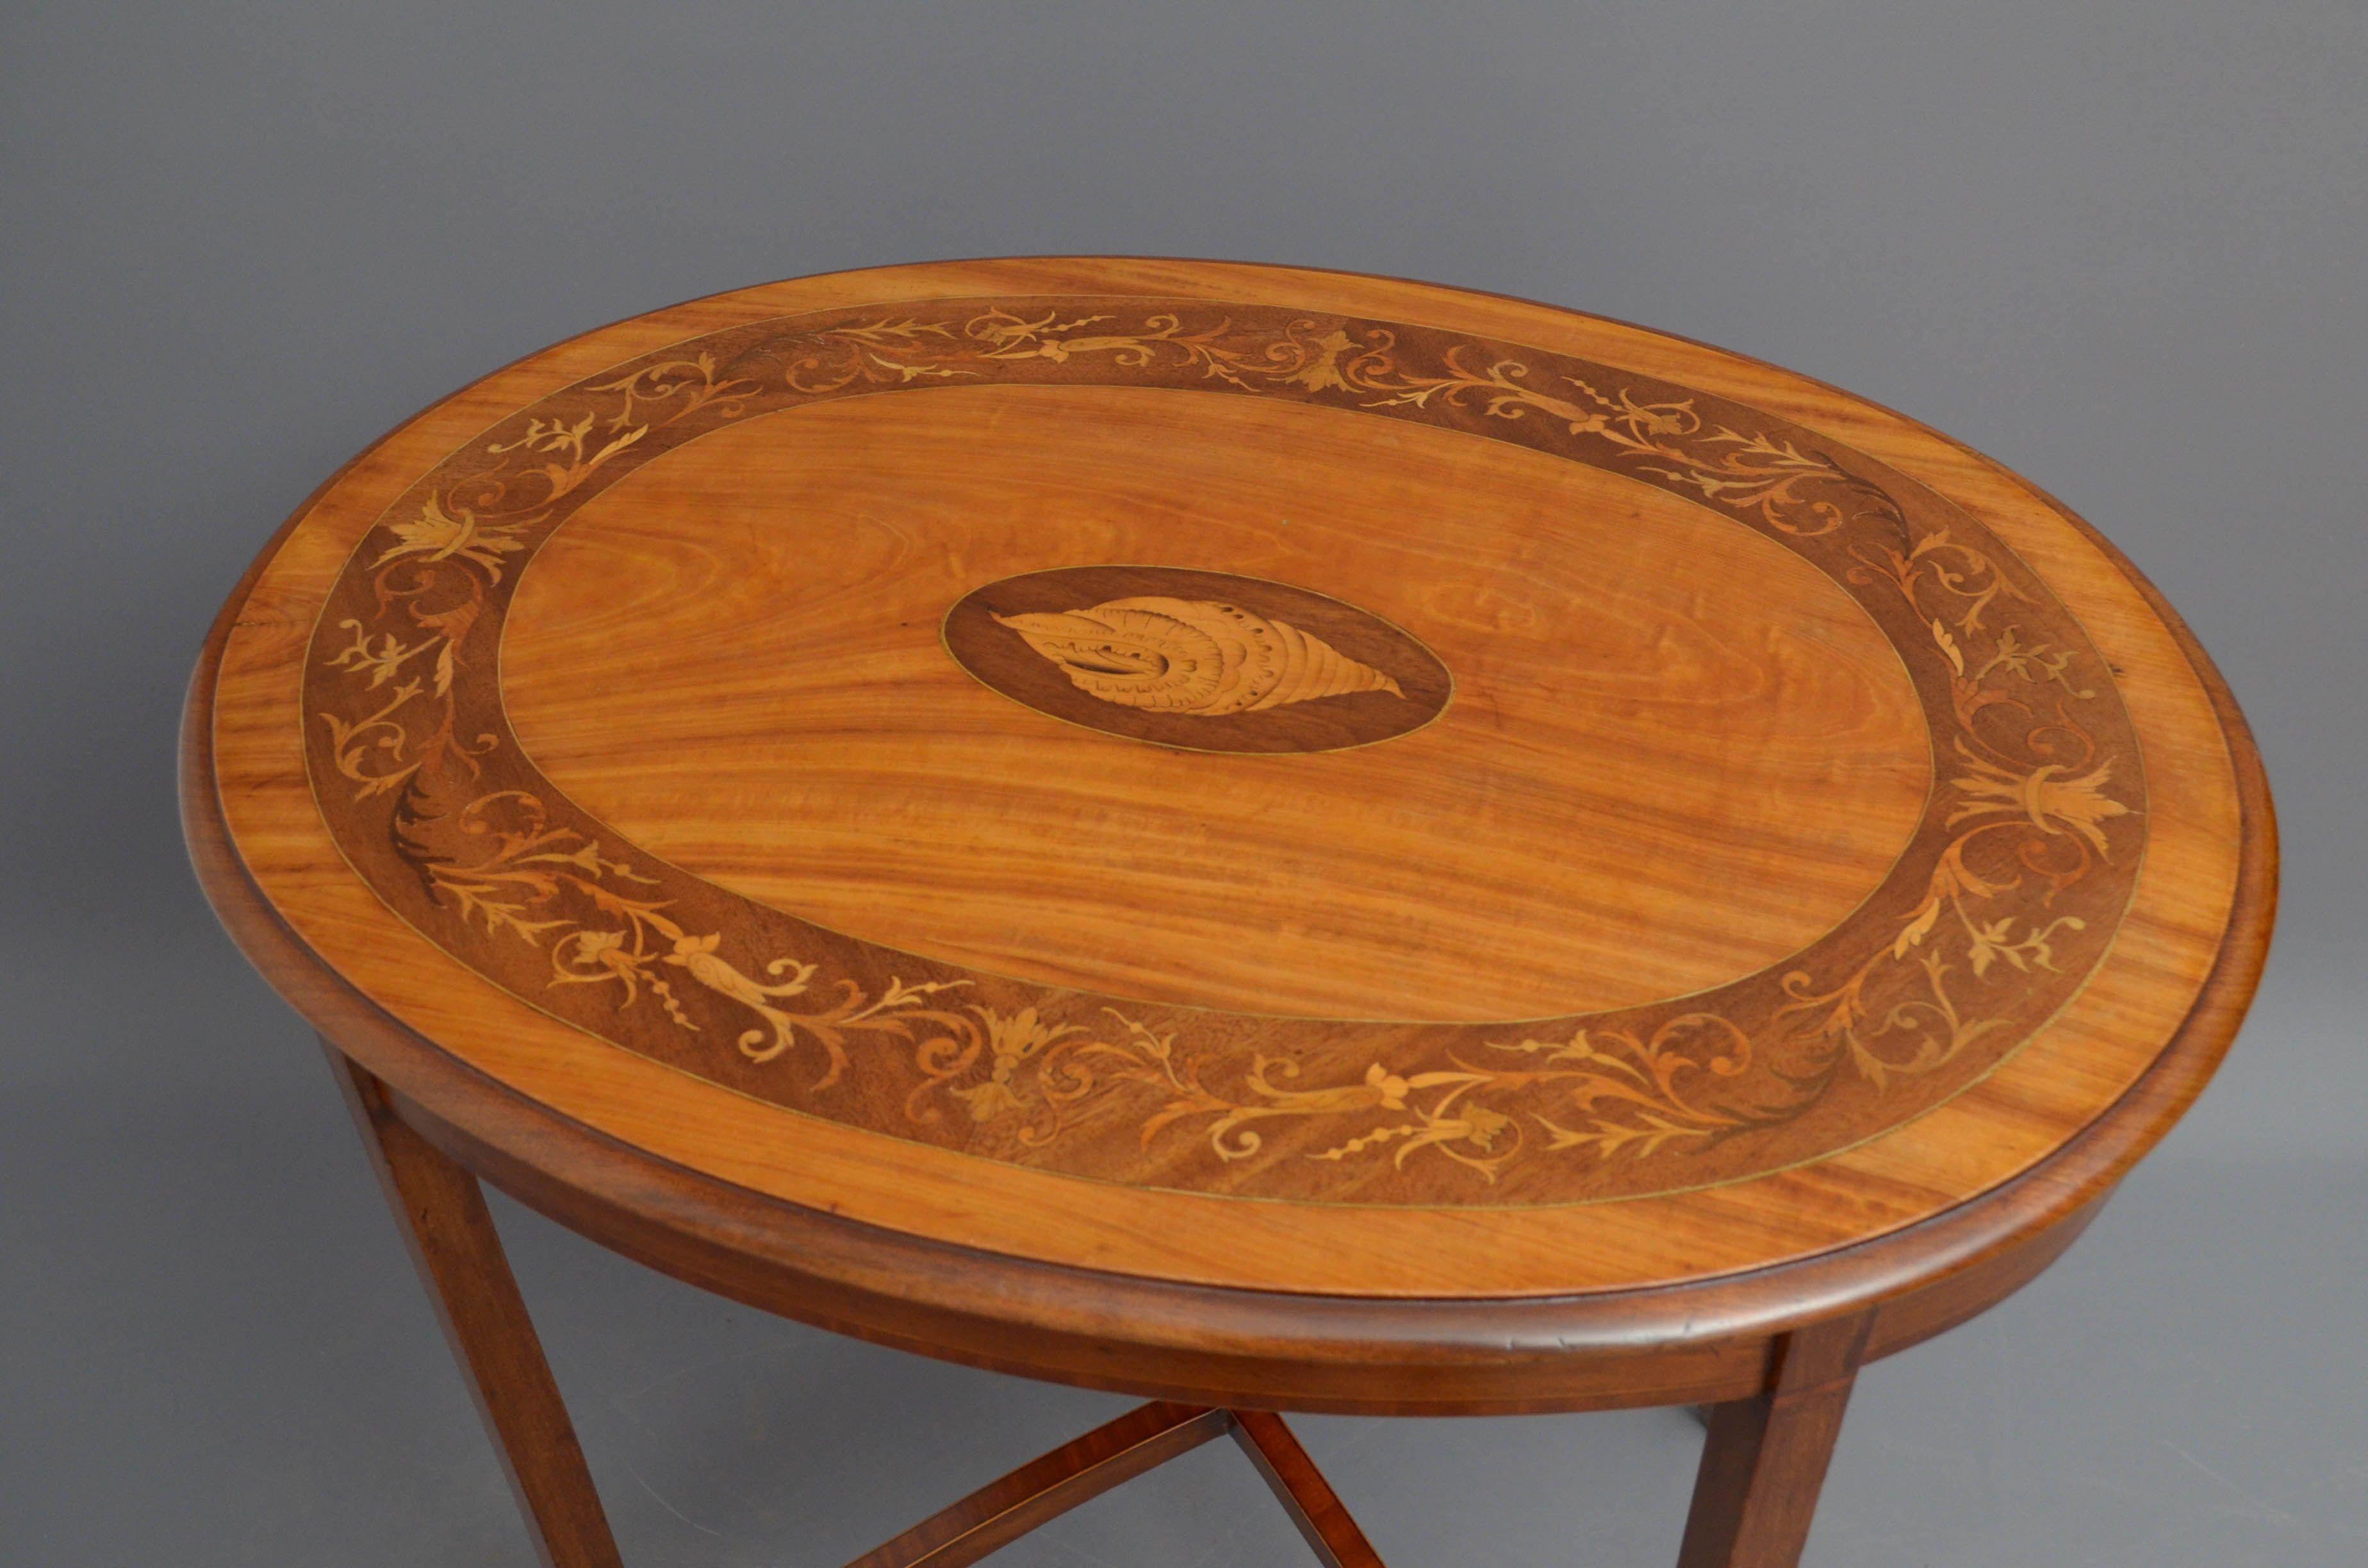 Sn5198 Edwardian satinwood lamp table of oval design, having neo classical inlaid to the top with conch shell inlaid centre above crossbanded frieze, standing on slender legs united by shaped and crossbanded stretchers. This antique table retains